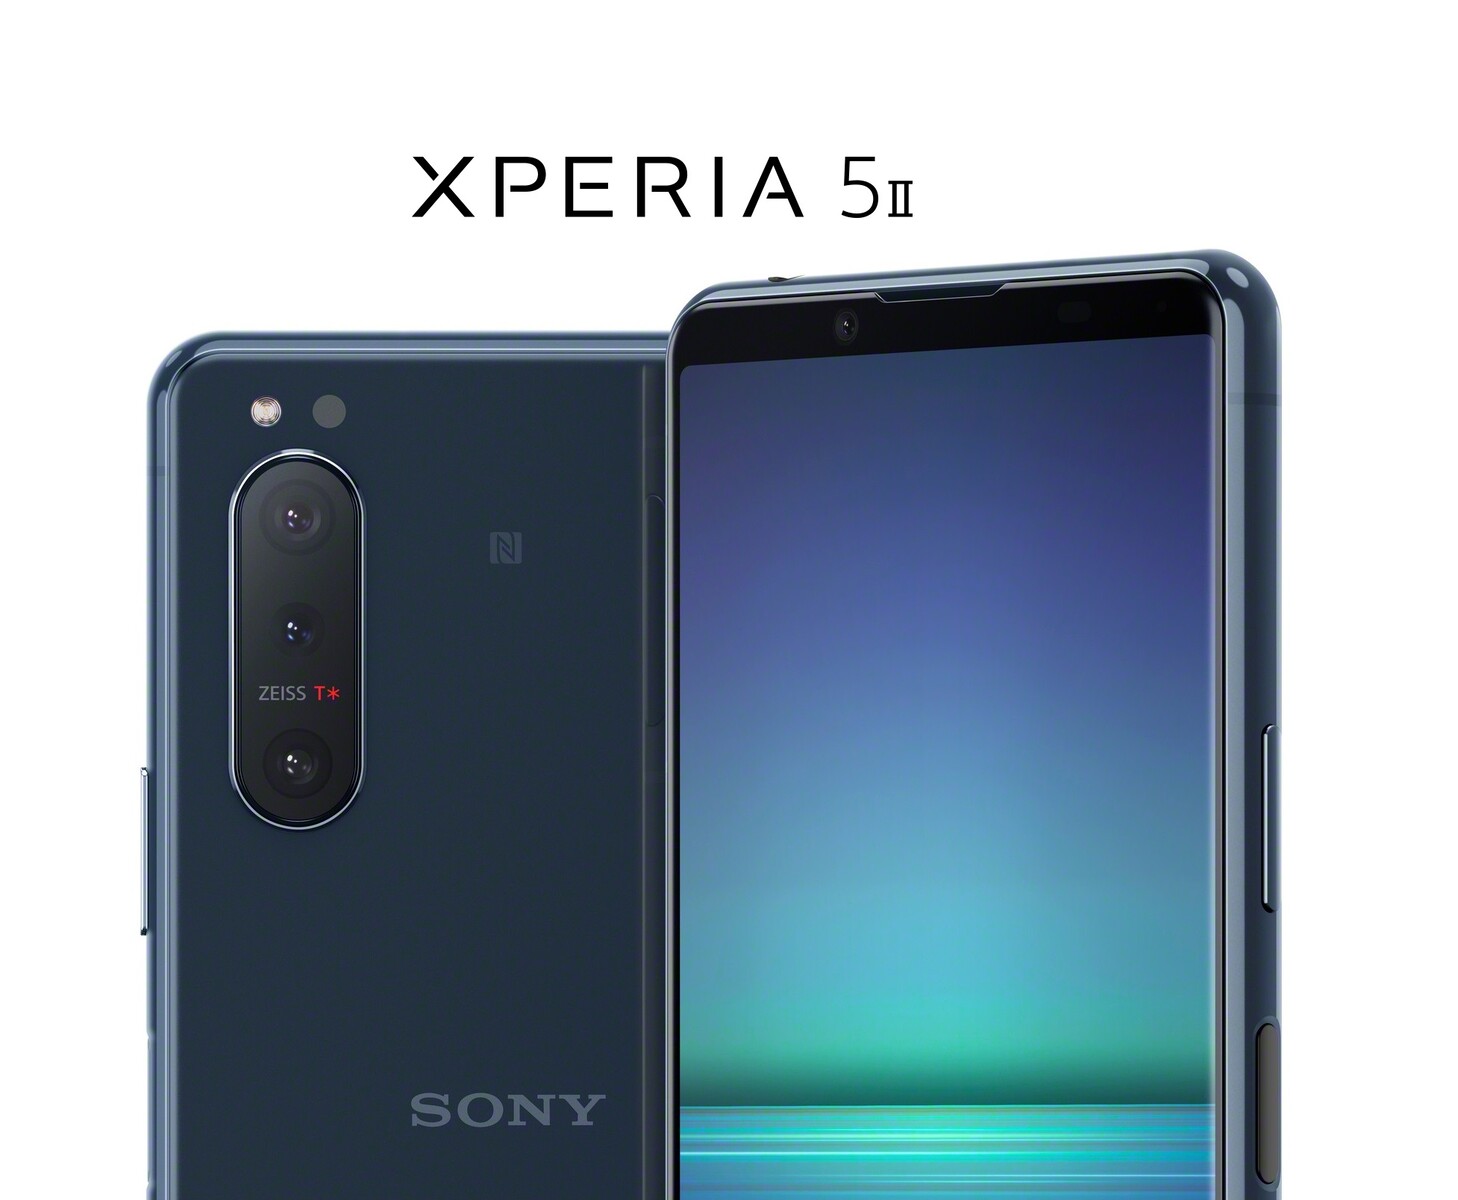 Images of Xperia - JapaneseClass.jp